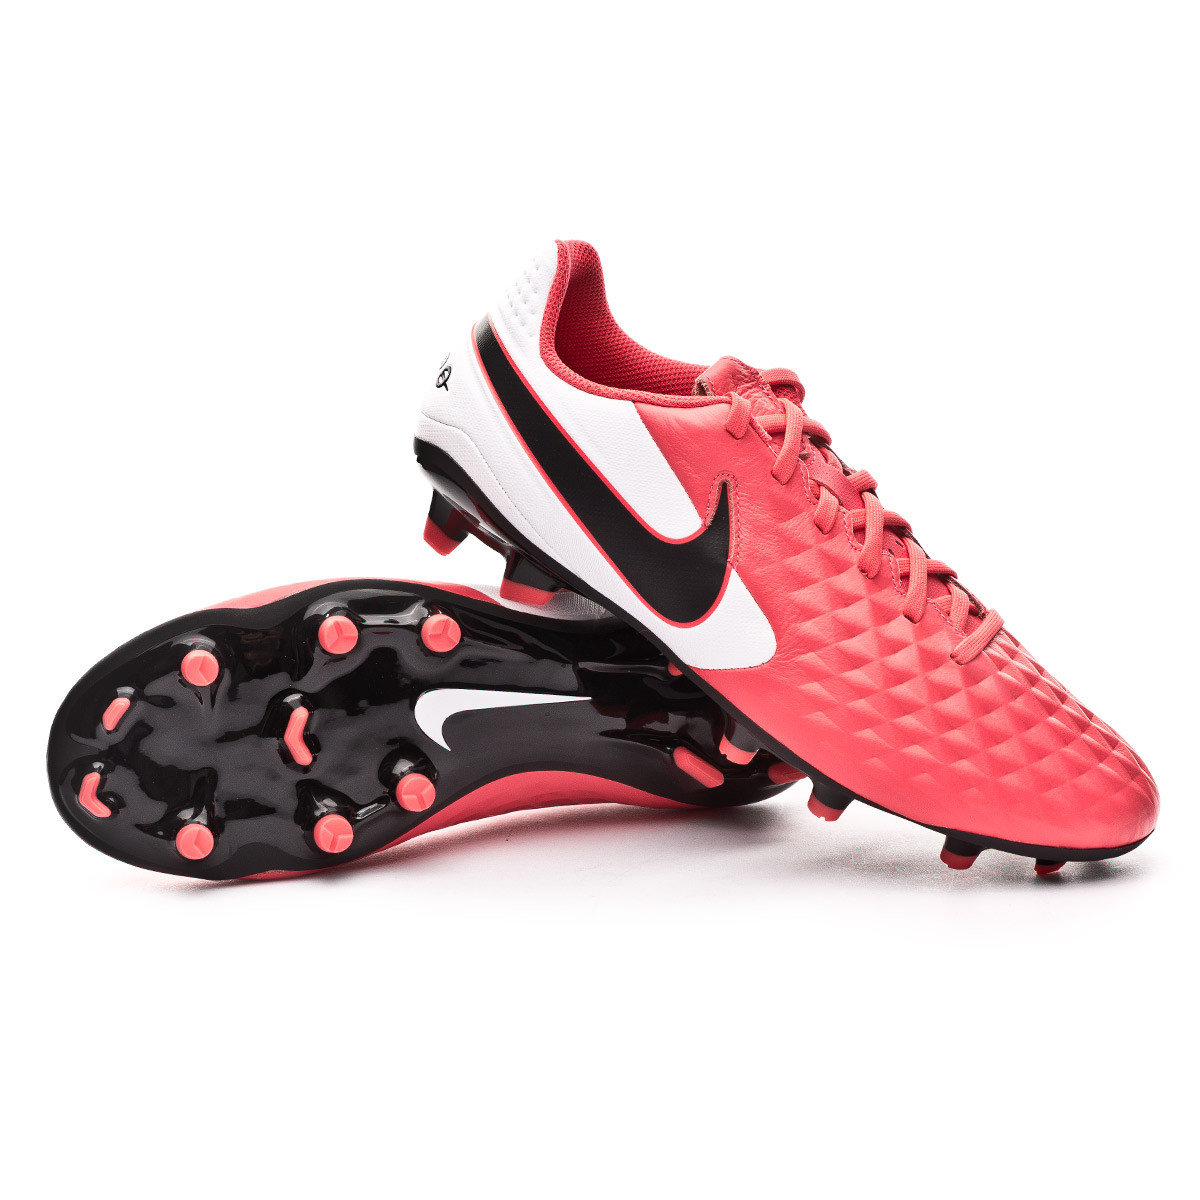 Nike Weather Legend 8 Club FG Soccer Cleats DICK 'S.